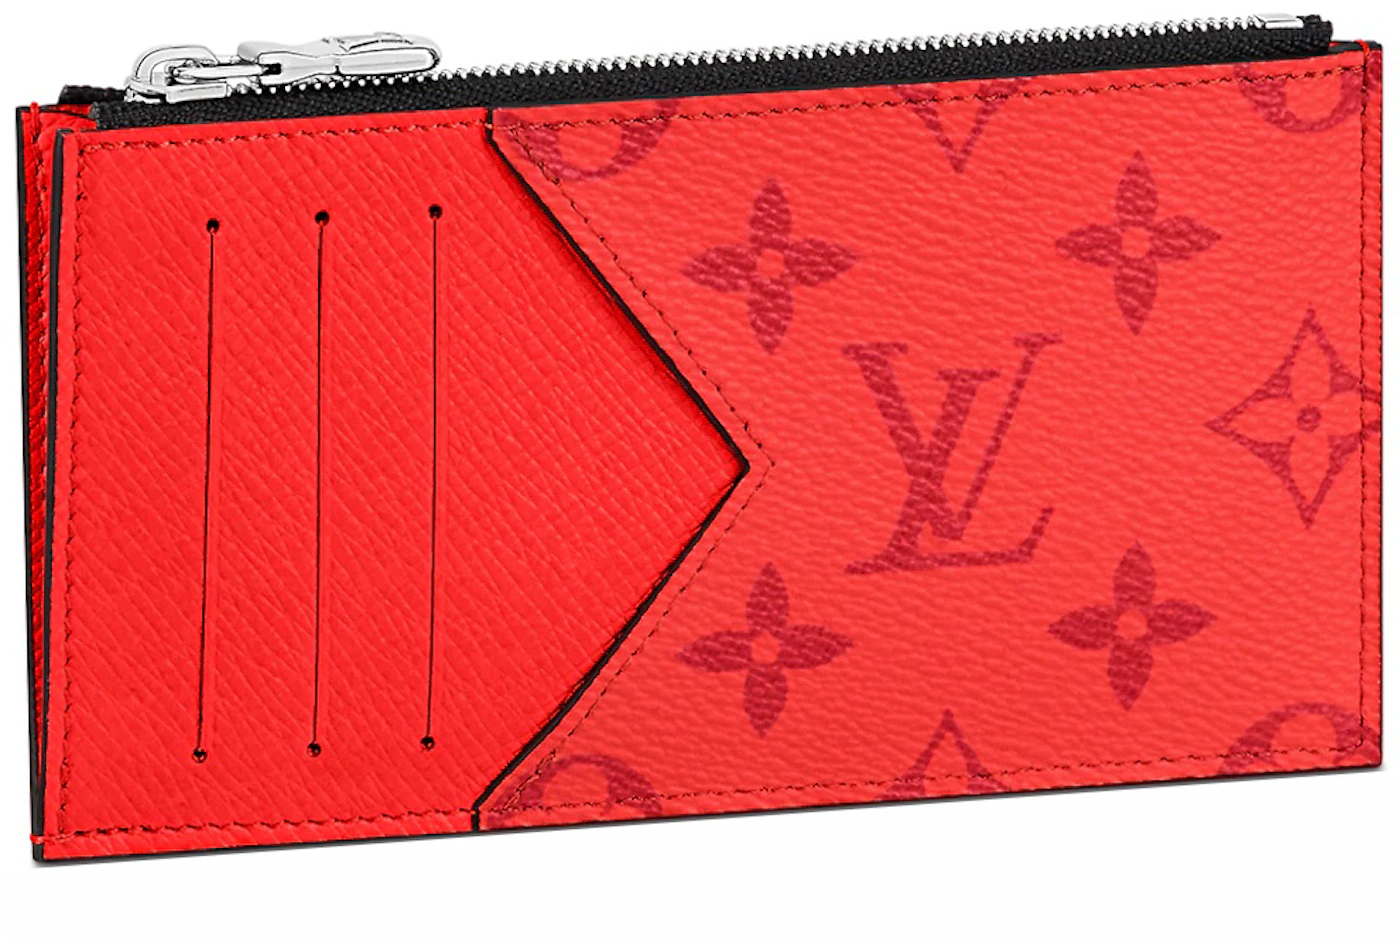 🔥NEW LOUIS VUITTON Felicie 8 Slot Card Holder Pouch Wallet Leather Red HOT  GIFT